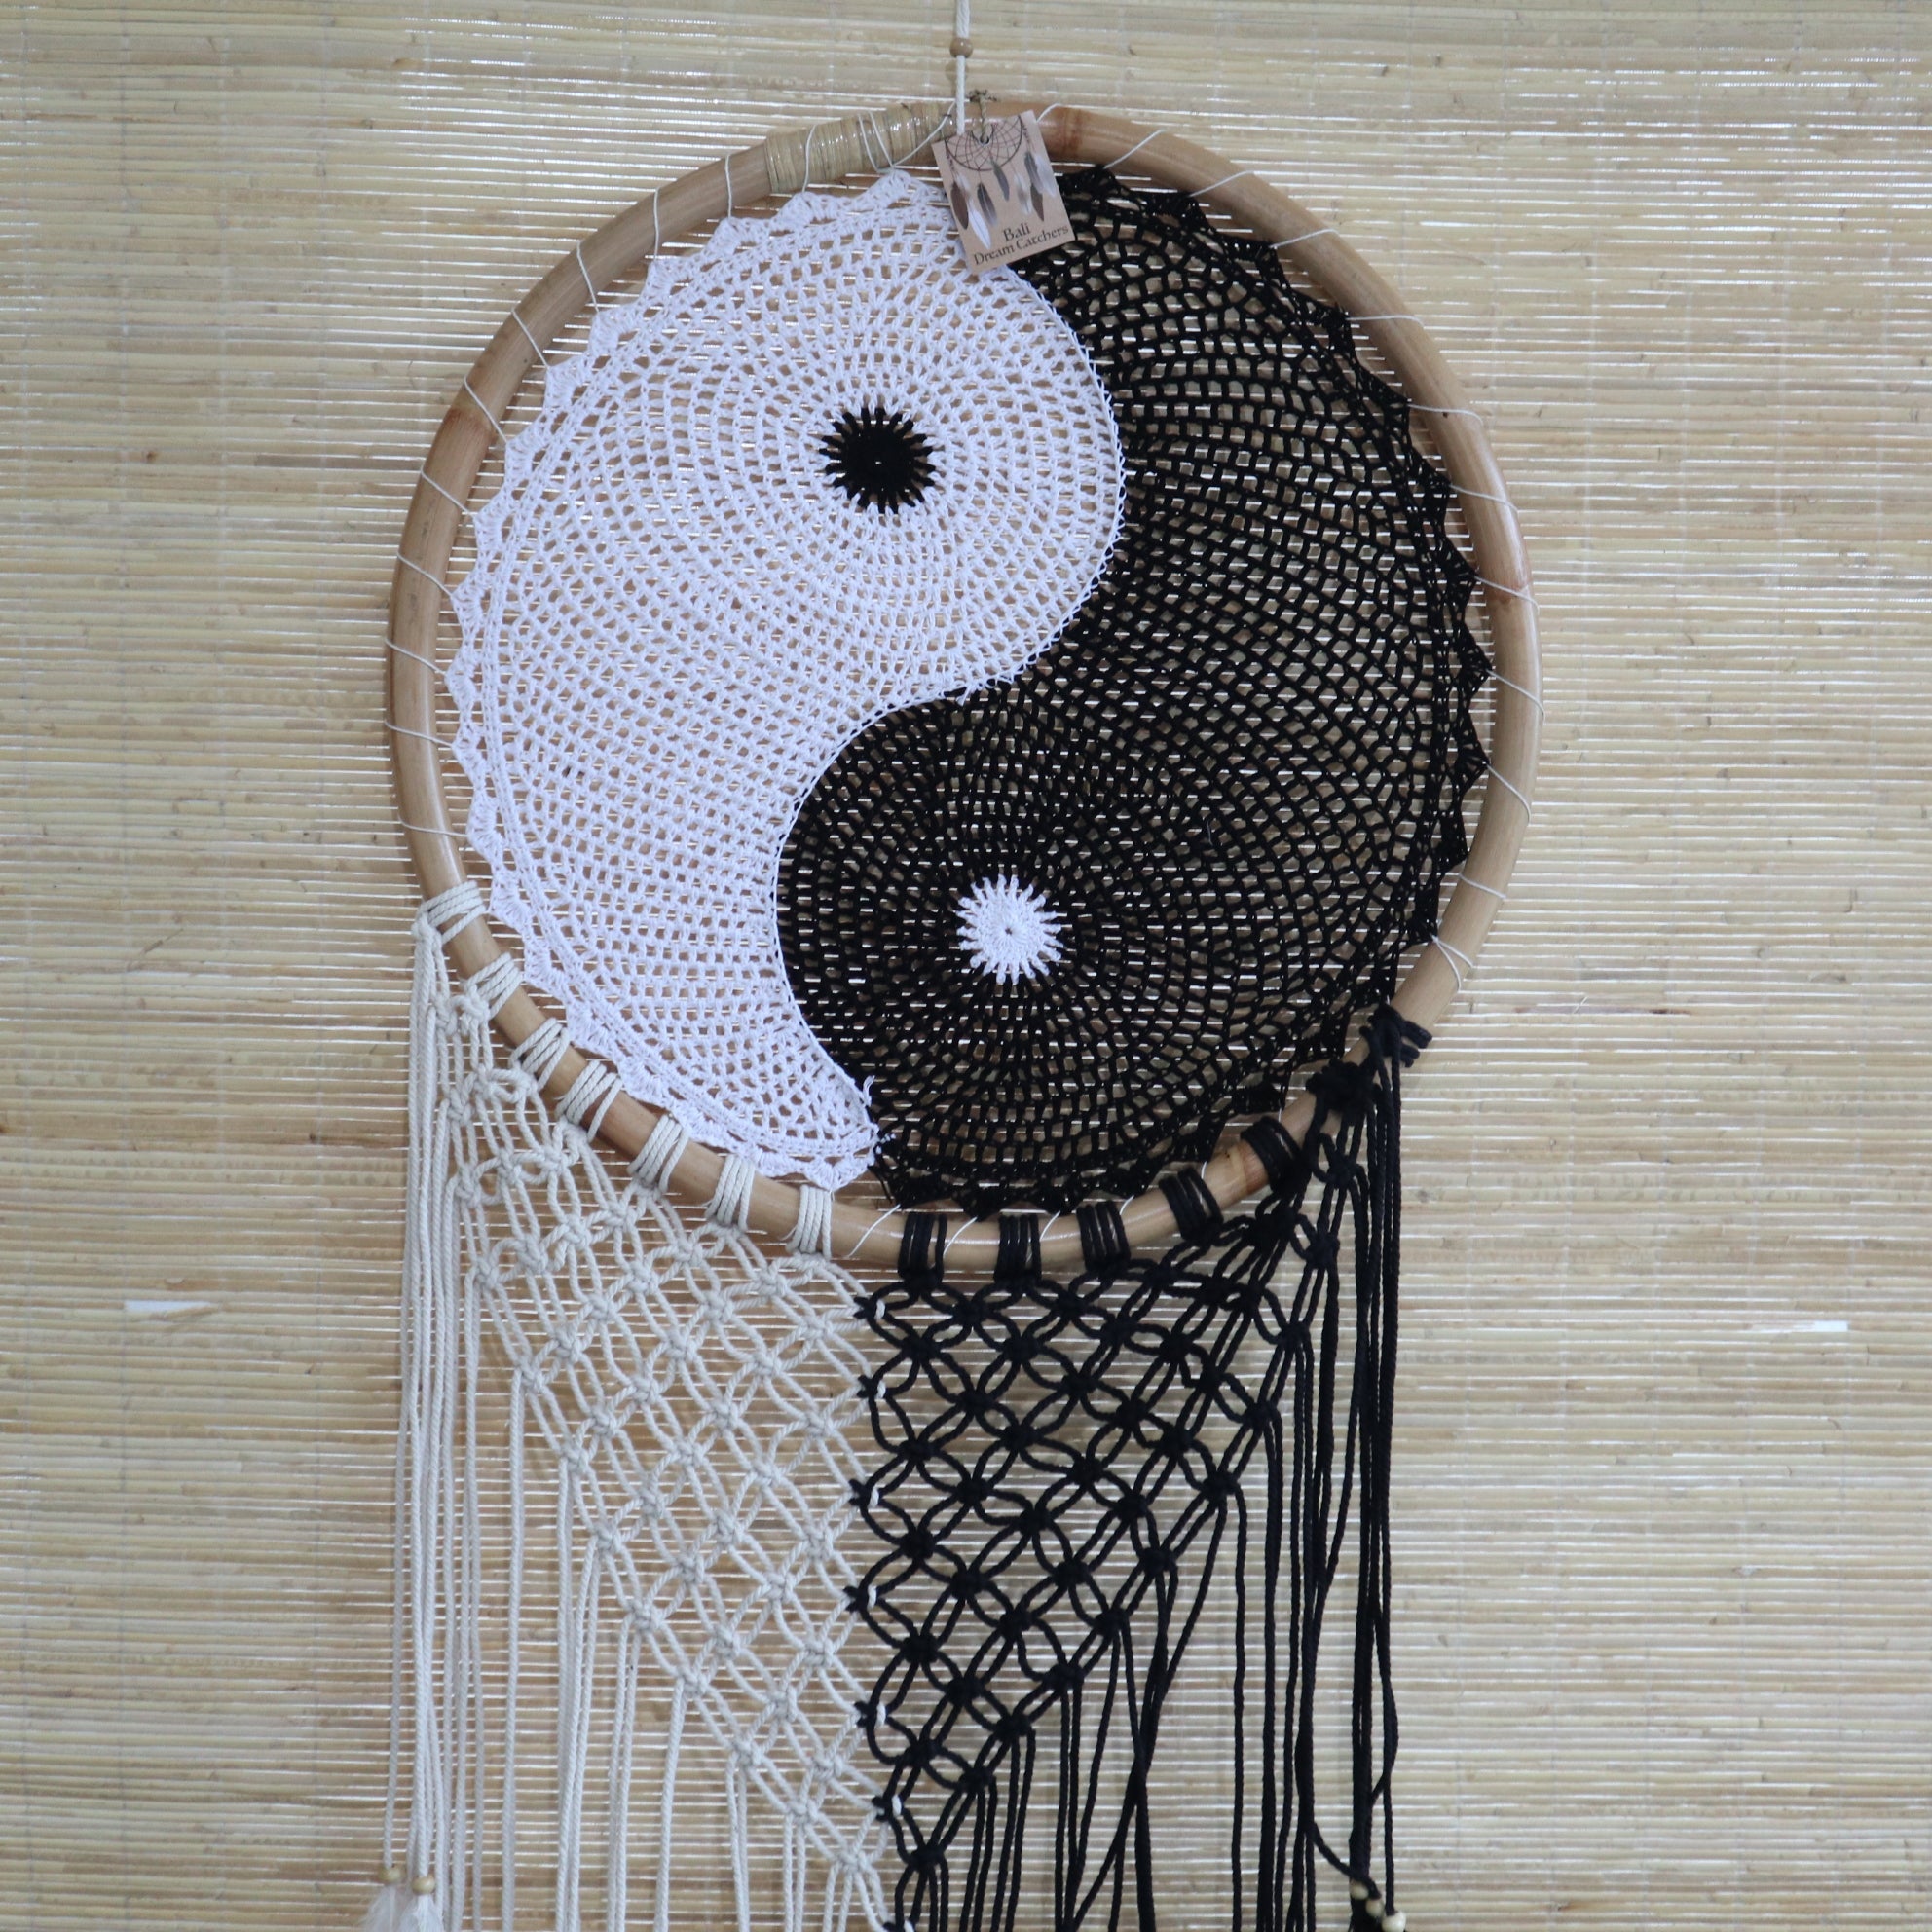 View Bali Dream Catchers Extra Large Ying Yang D 50cm information